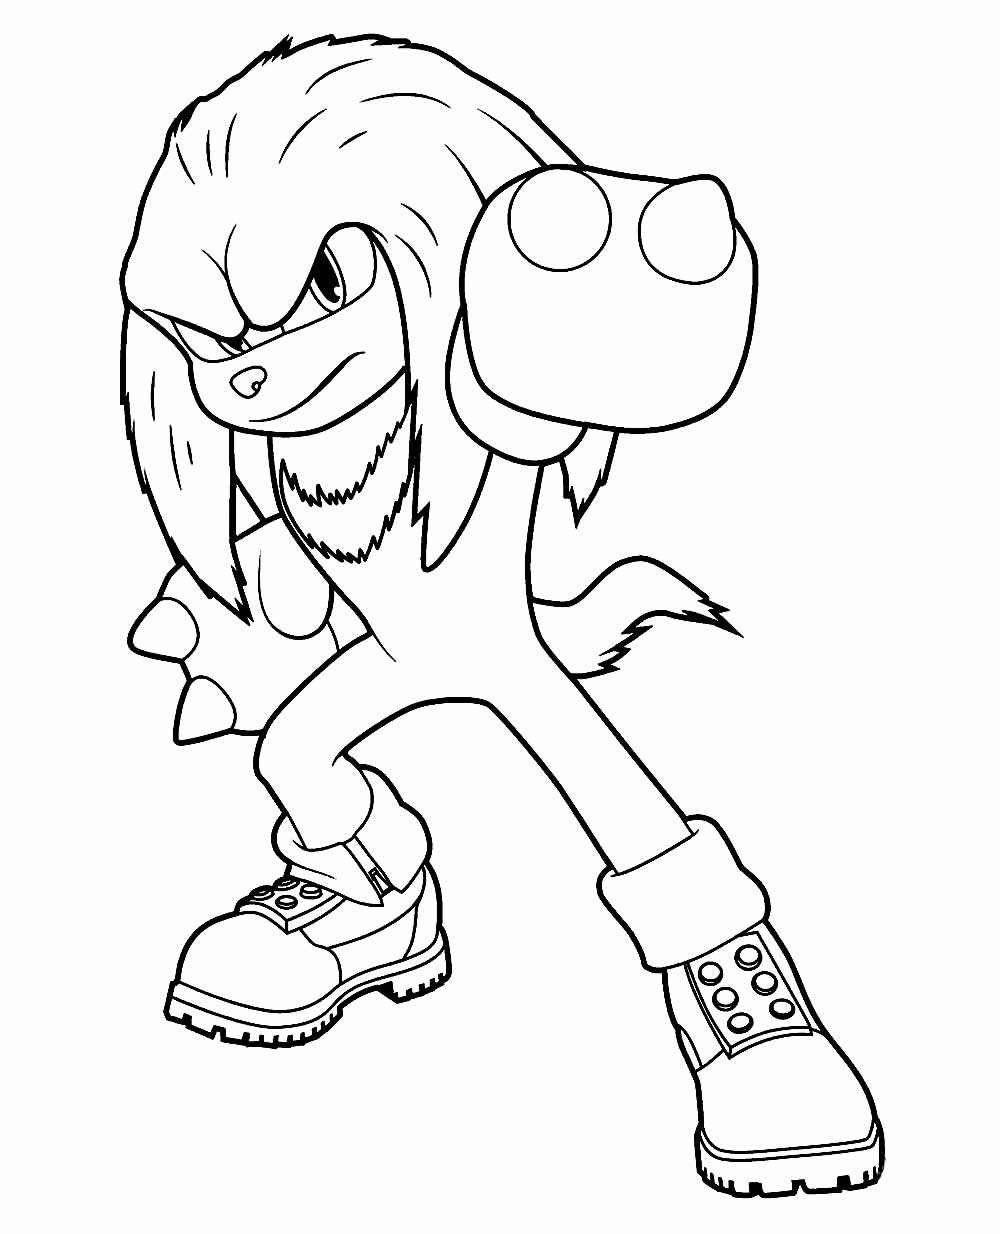 Knuckles the Echidna para colorir